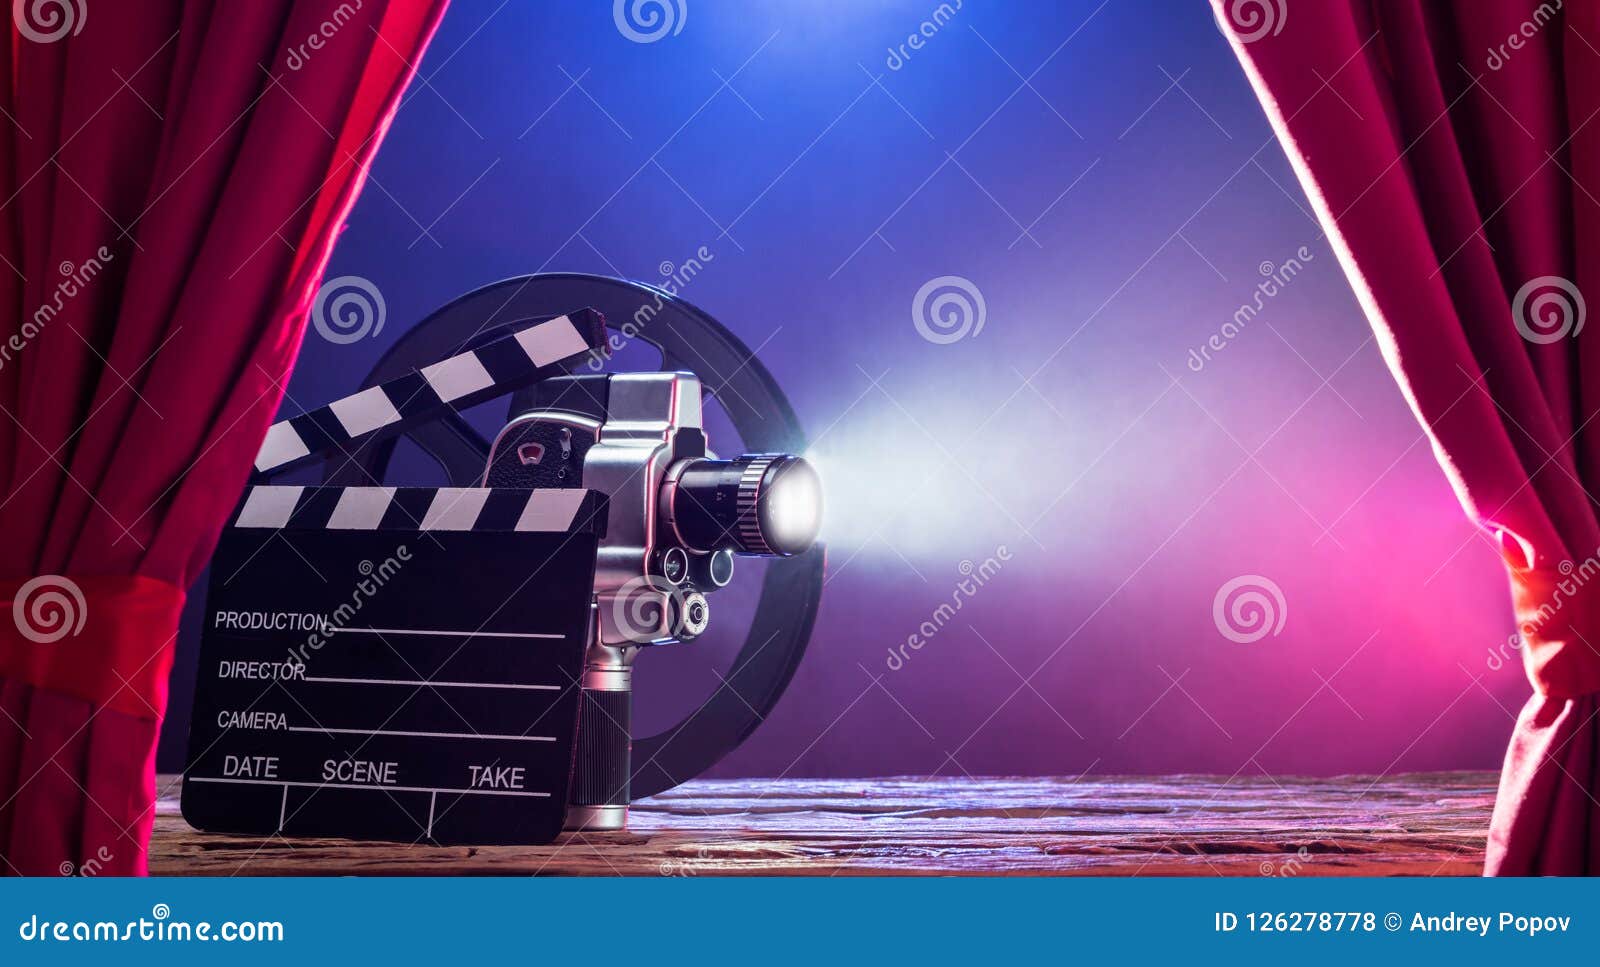 movie camera with clapperboard and film reel on stage